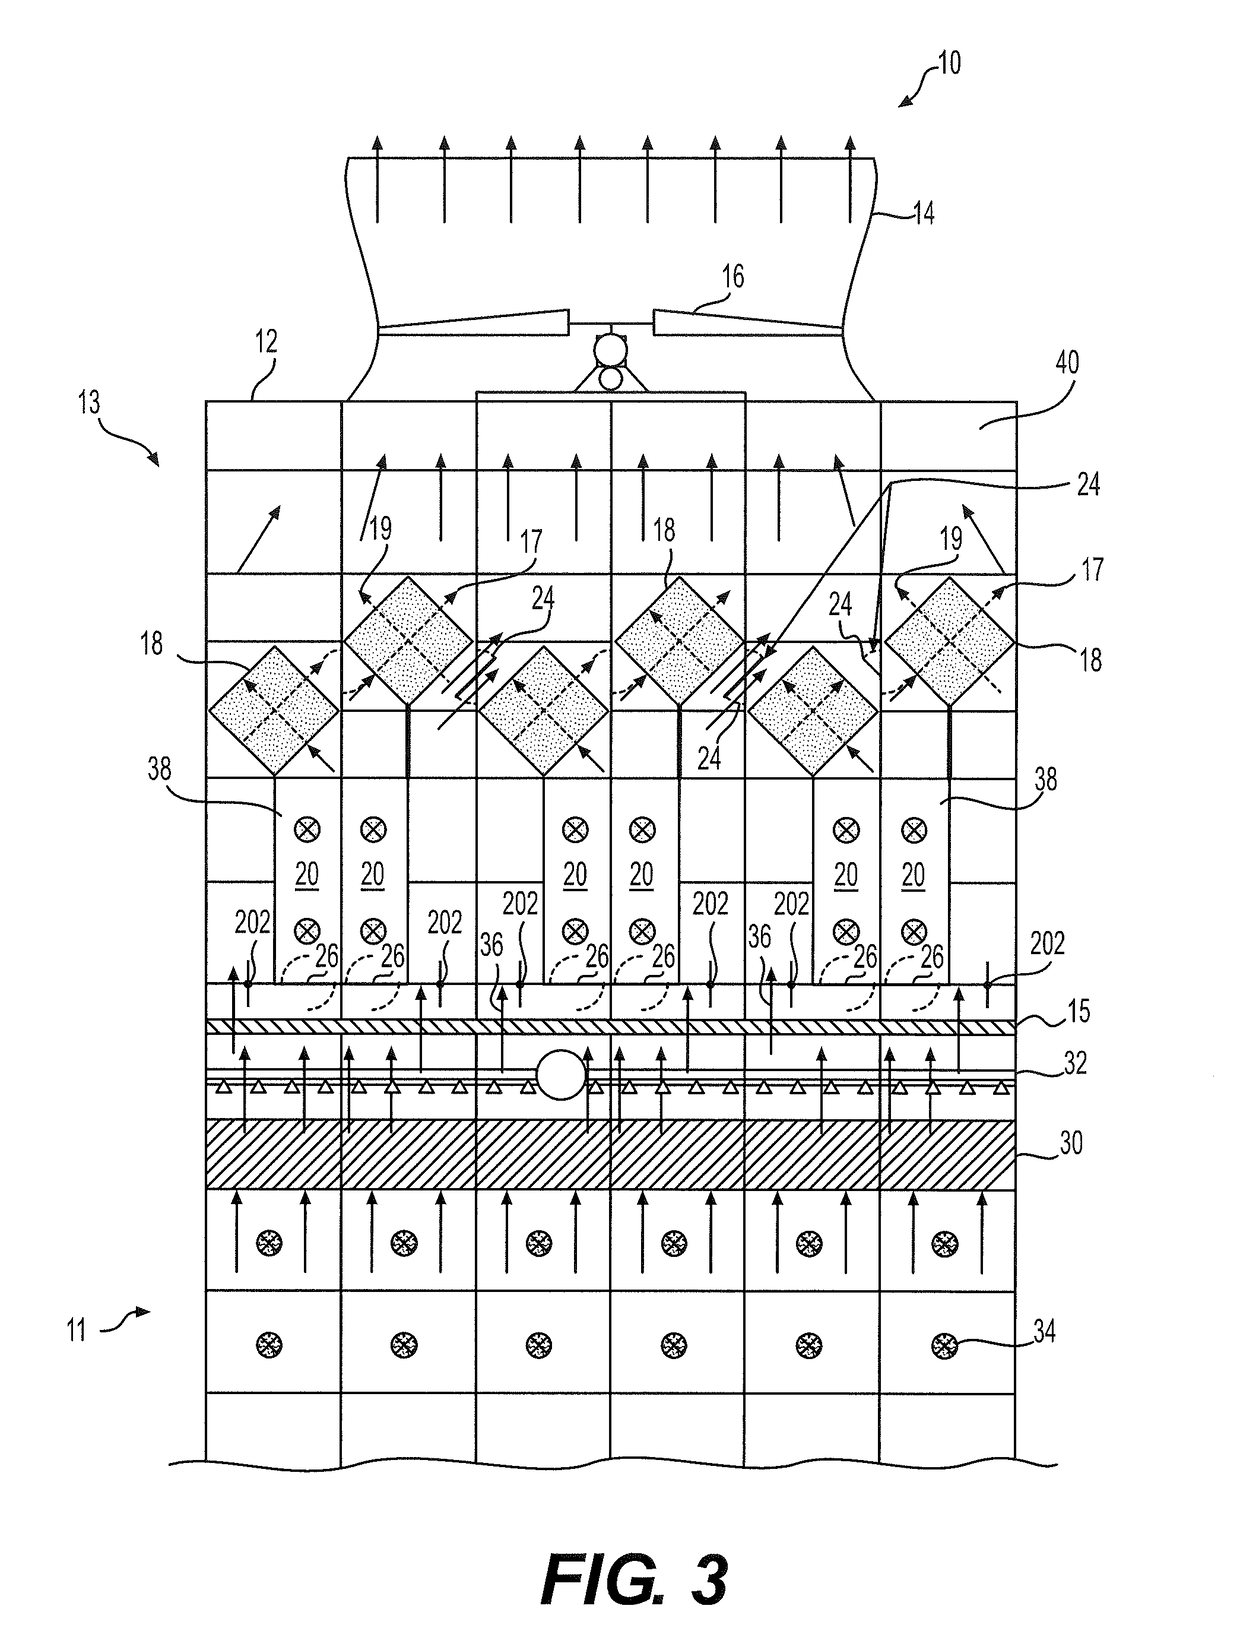 Air-to-air heat exchanger bypass for wet cooling tower apparatus and method